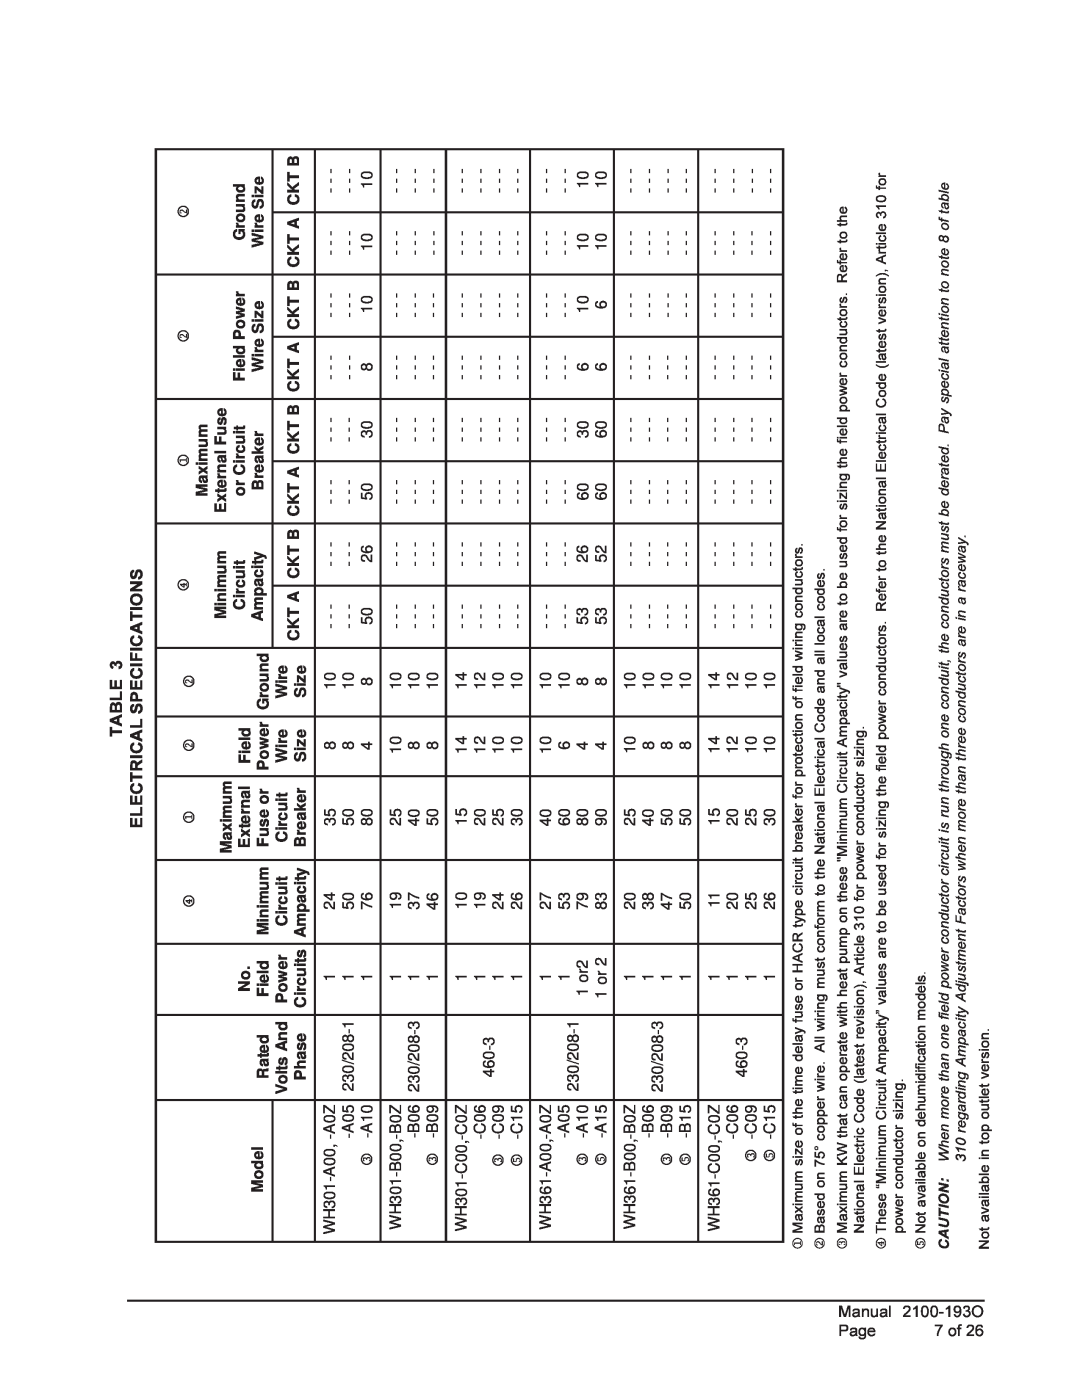 Bard WH361, WH-301 installation instructions Table Electrical Specifications 